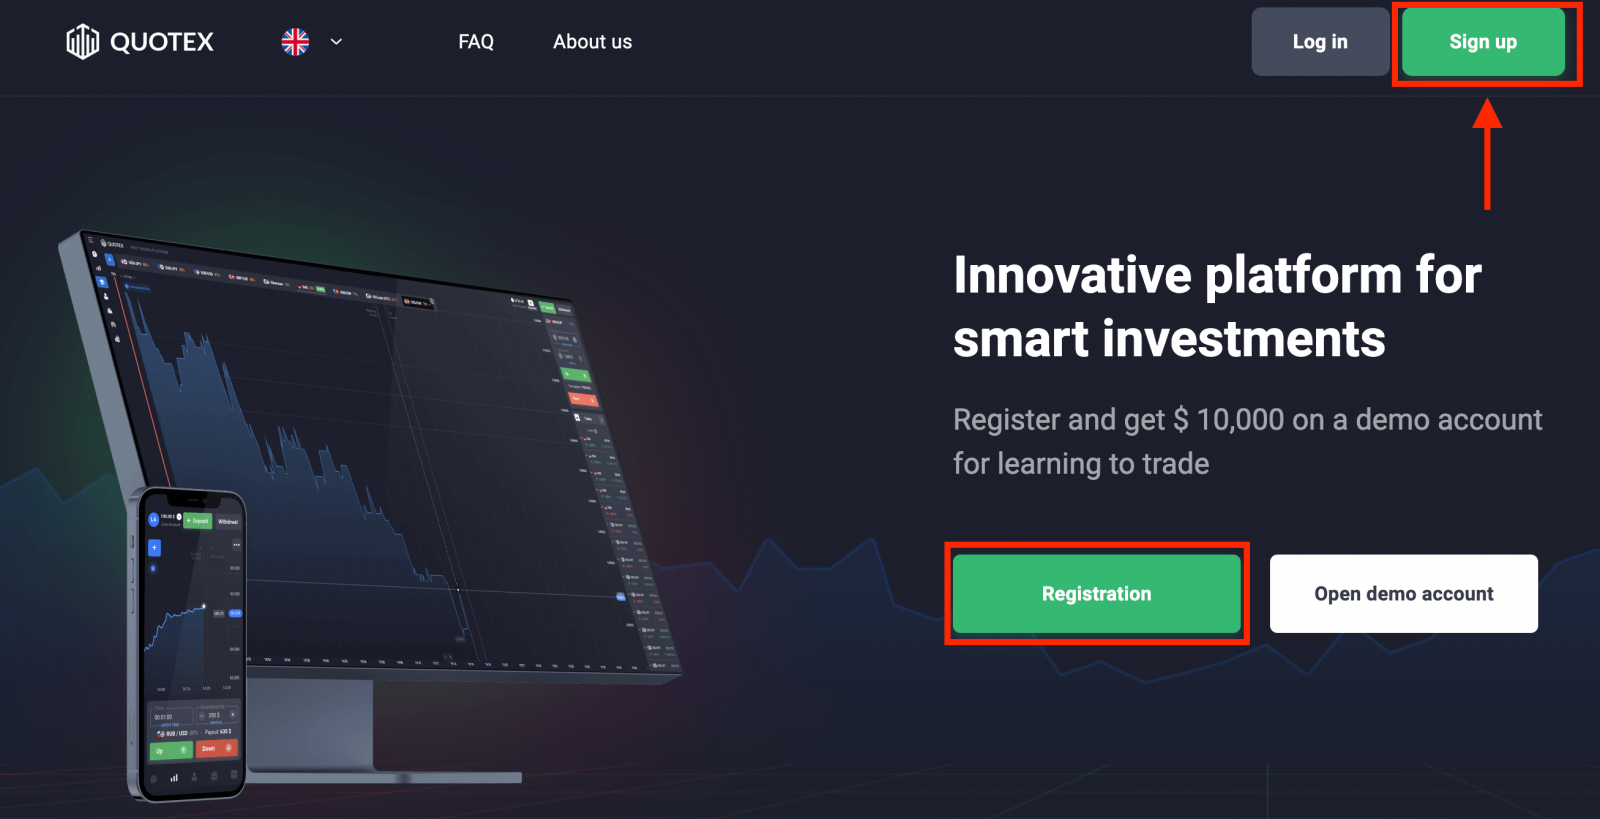 How to Start Quotex Trading in 2021: A Step-By-Step Guide for Beginners